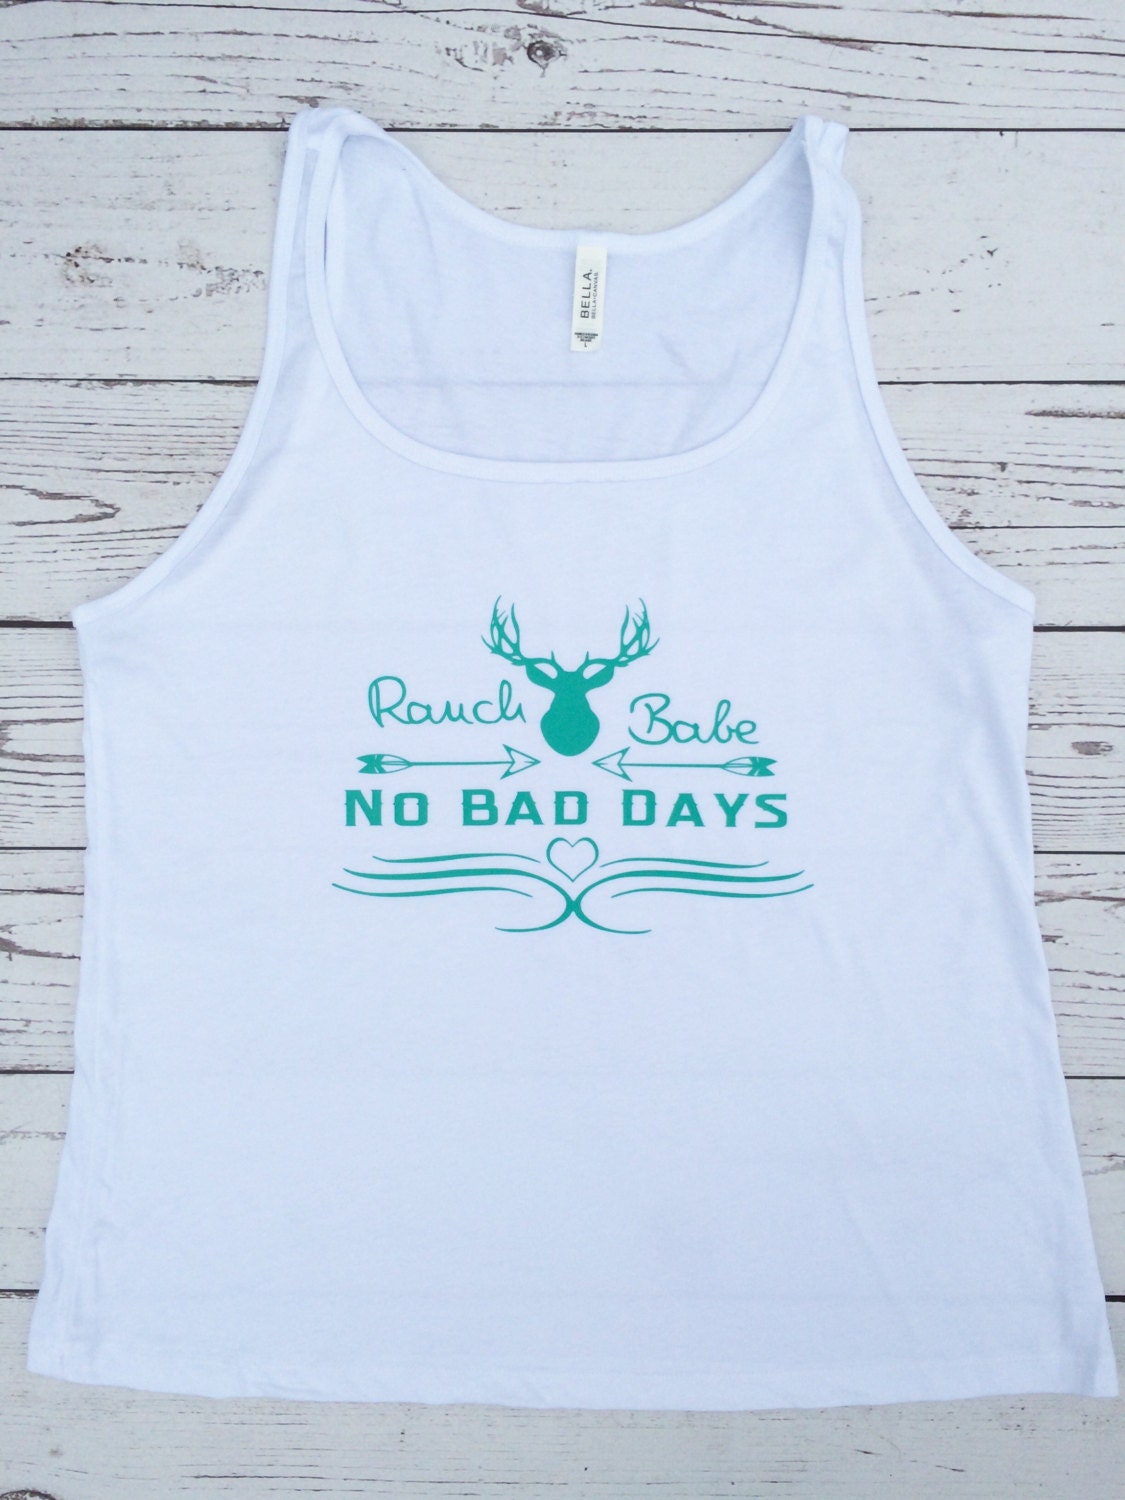 Rodeo Barn Babe Cowgirl Tank Top Women's. Shirt Cowgirl Fashion Country Farm Clothing Apparel Animals Horse Tank Ranch Western